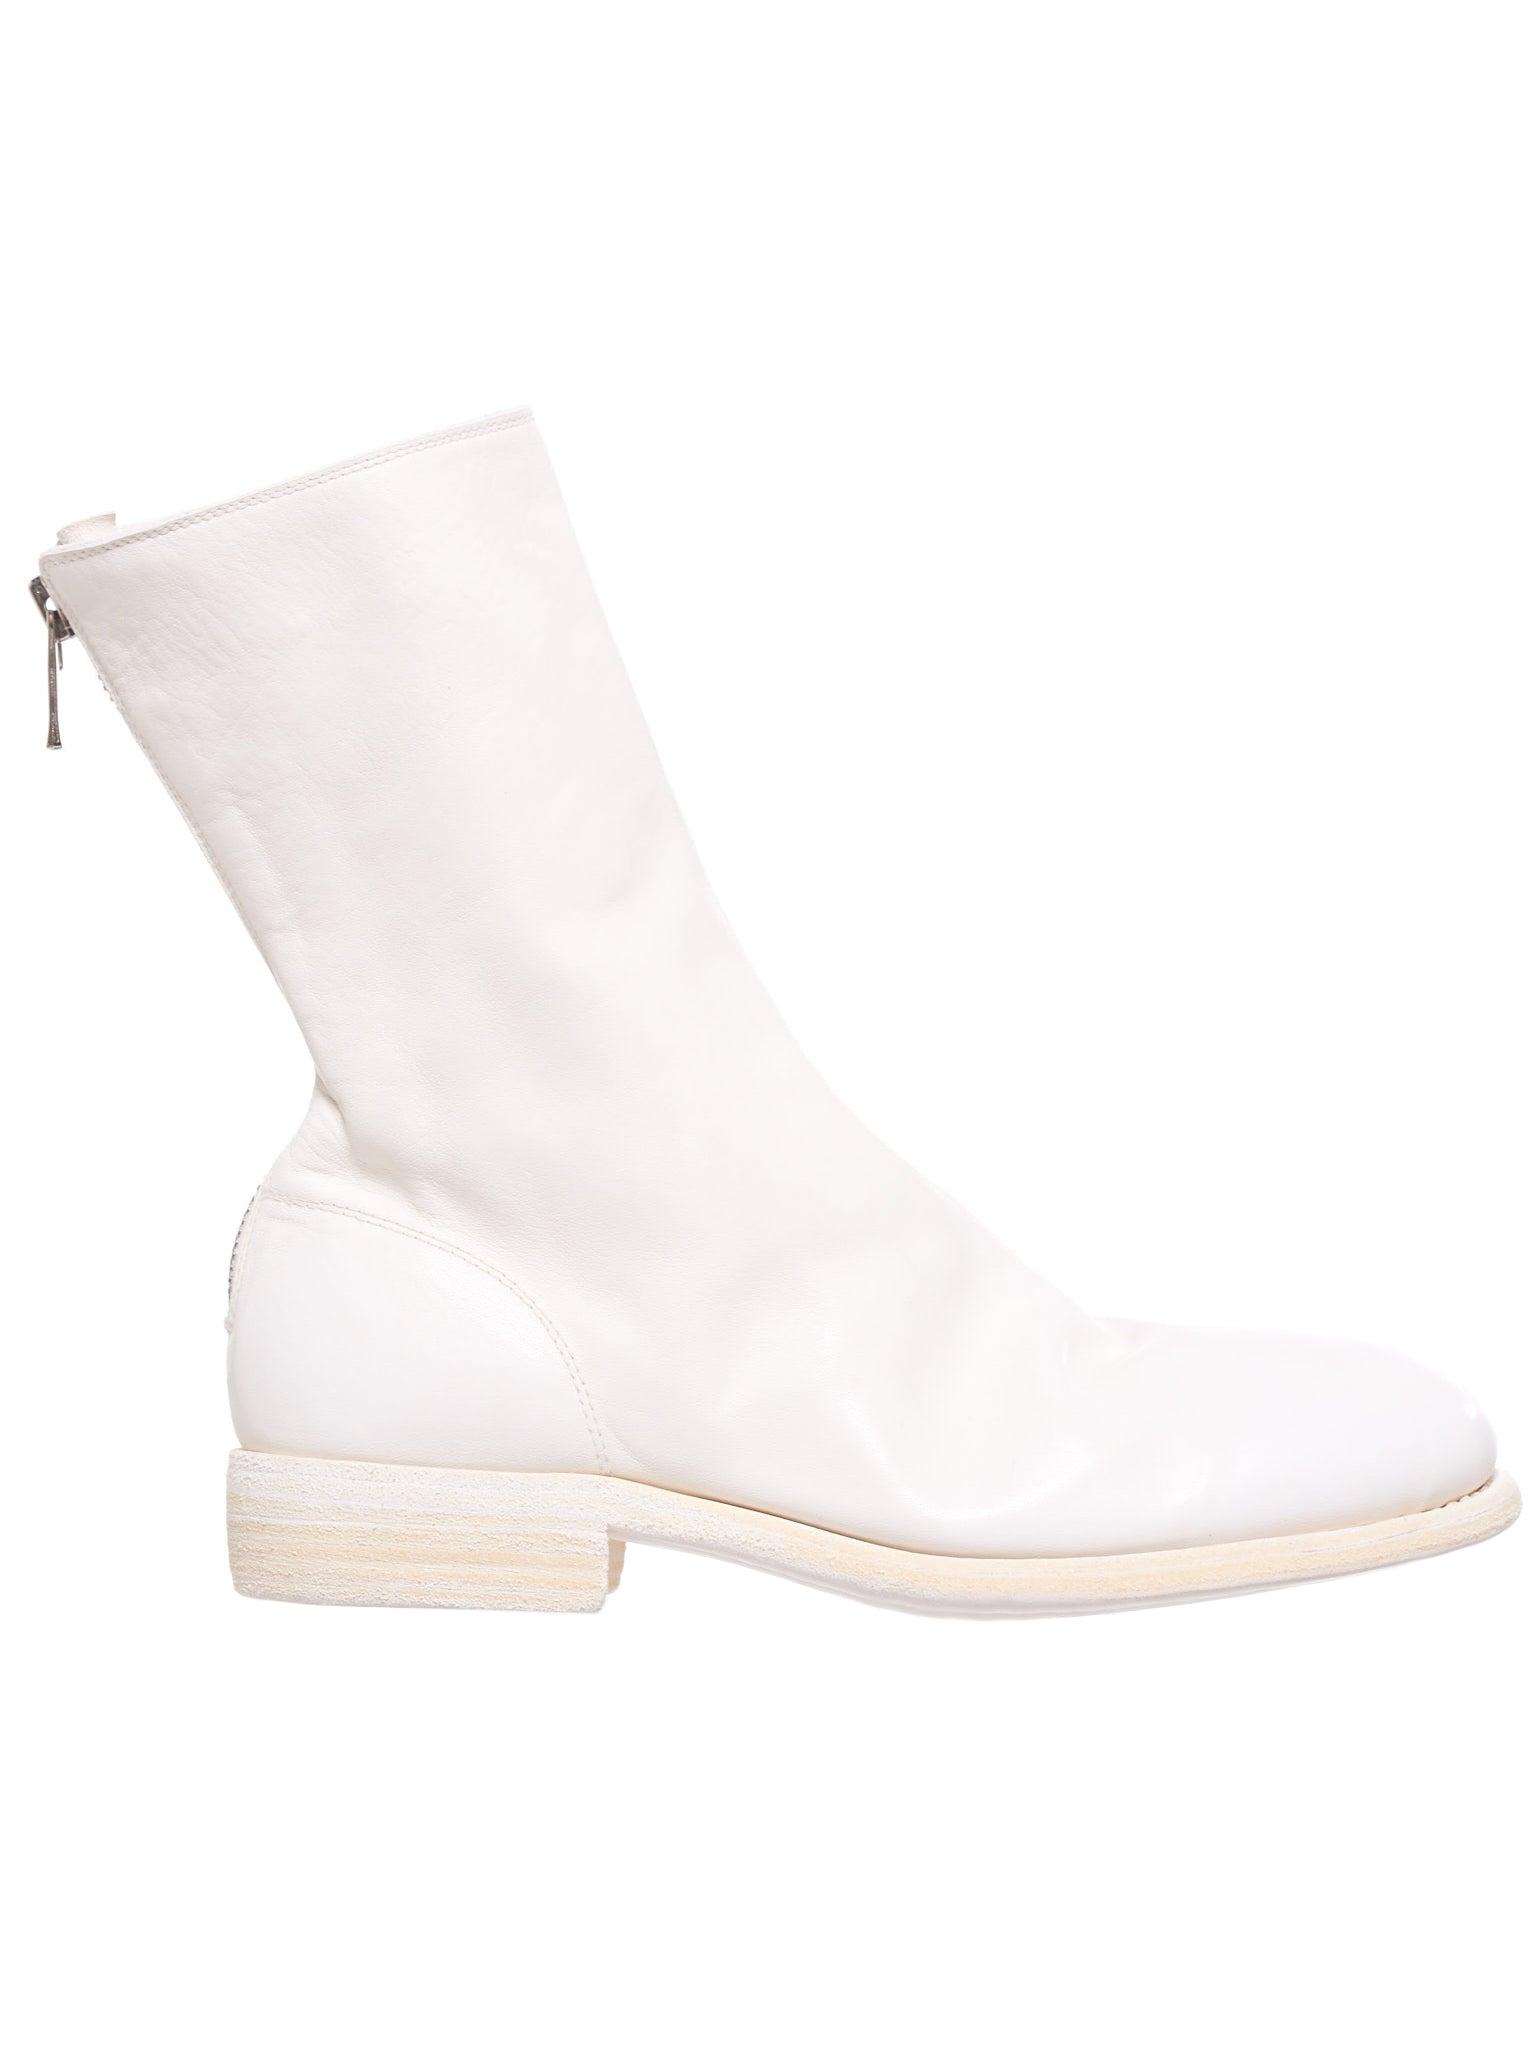 Guidi 988 Soft Horse Leather Boots in White | Lyst